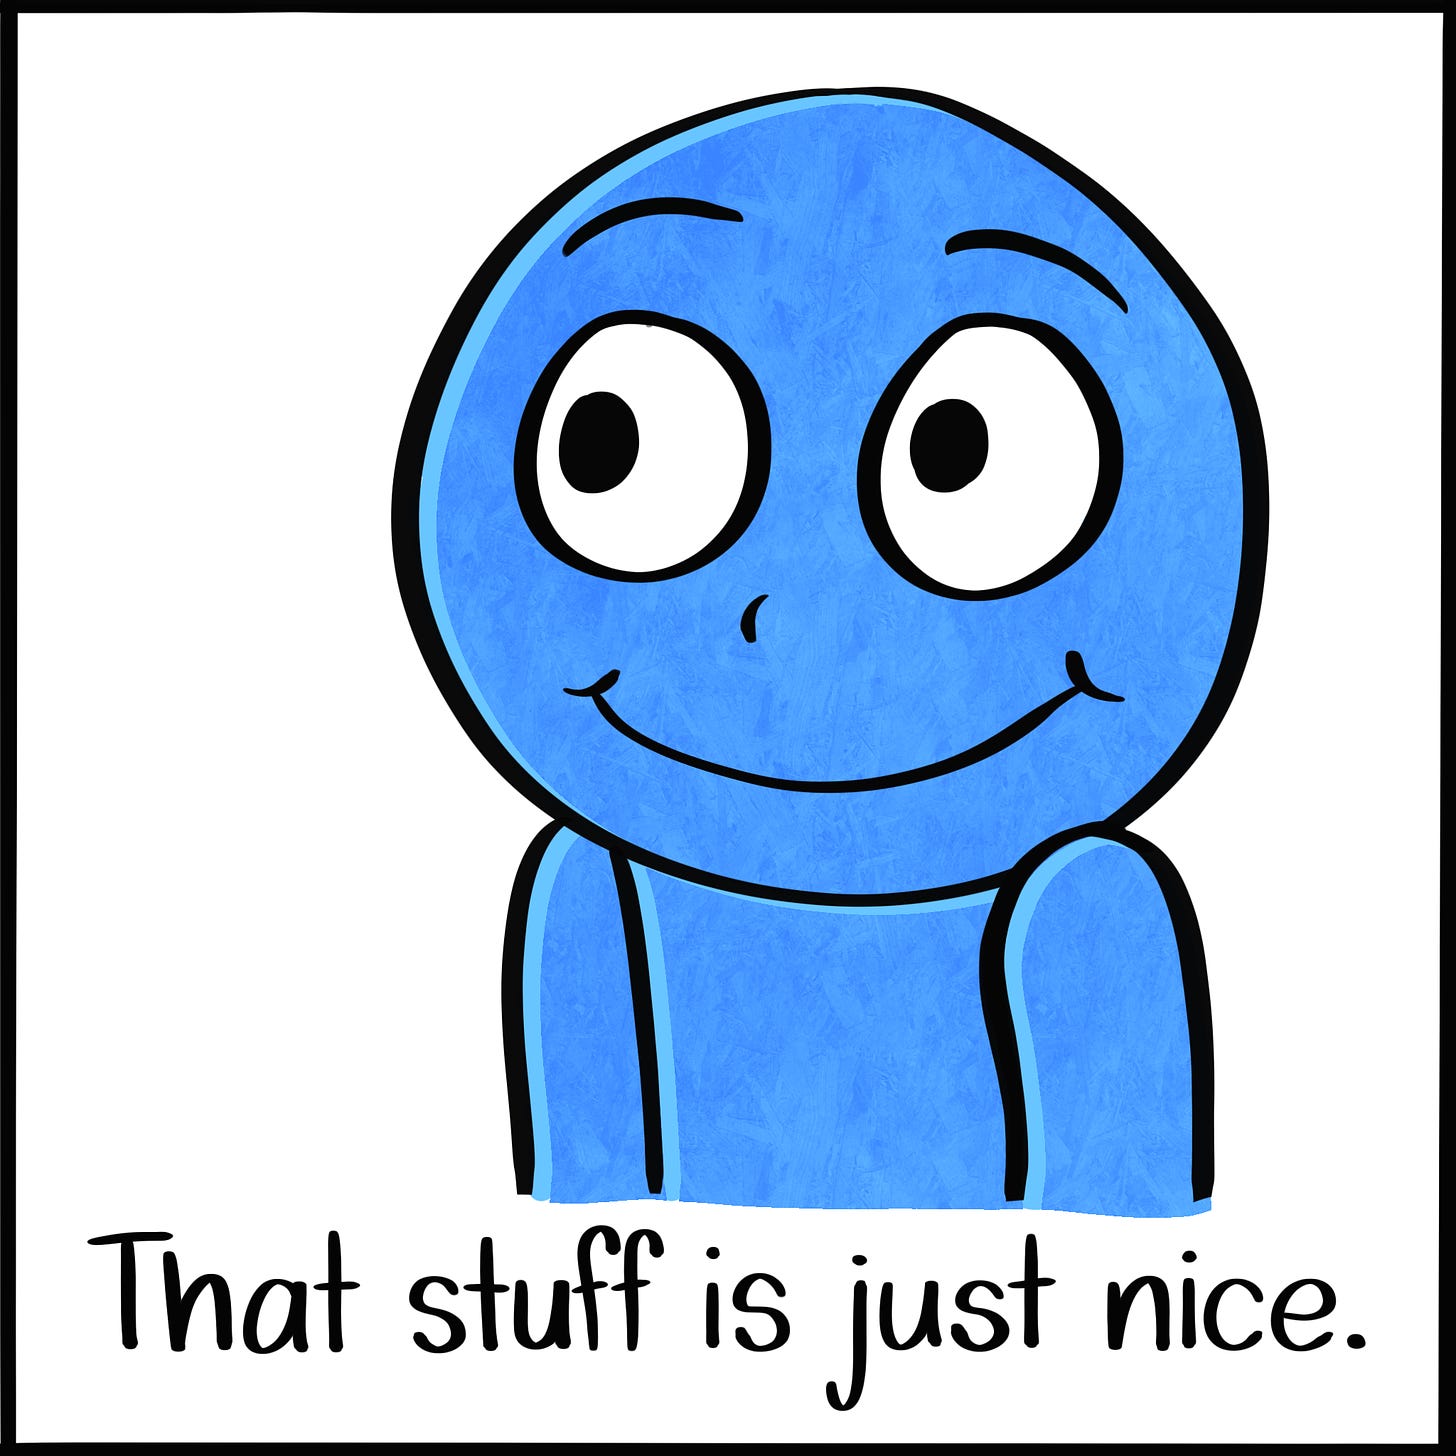 Caption: That stuff is just nice. Image: Blue person from the chest up, a huge smile on their face.